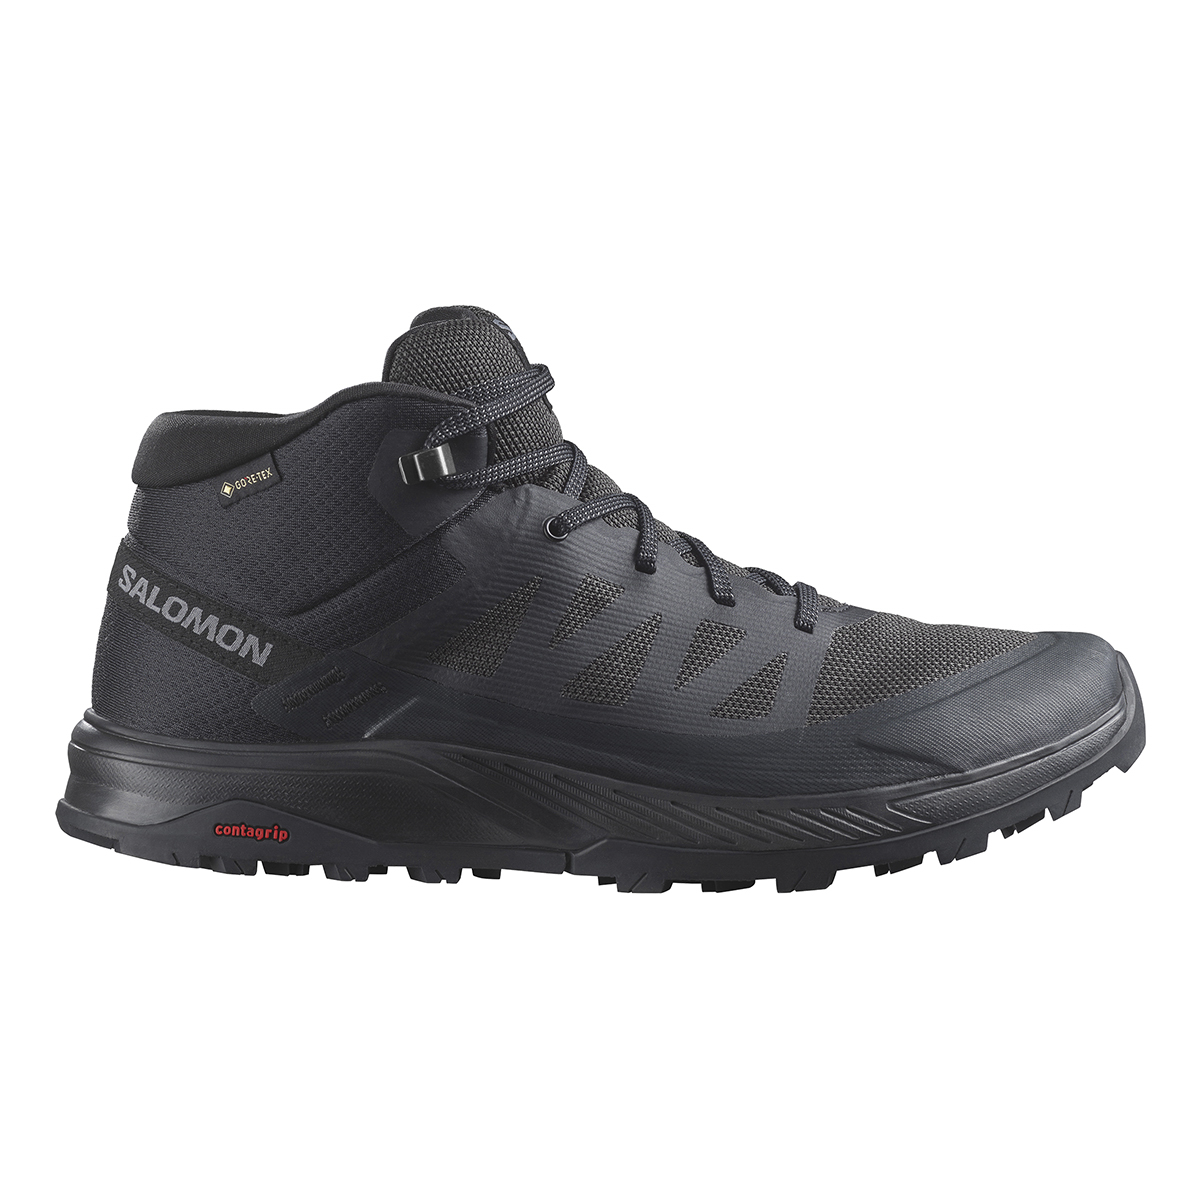 OUTRISE MID GORE-TEX M